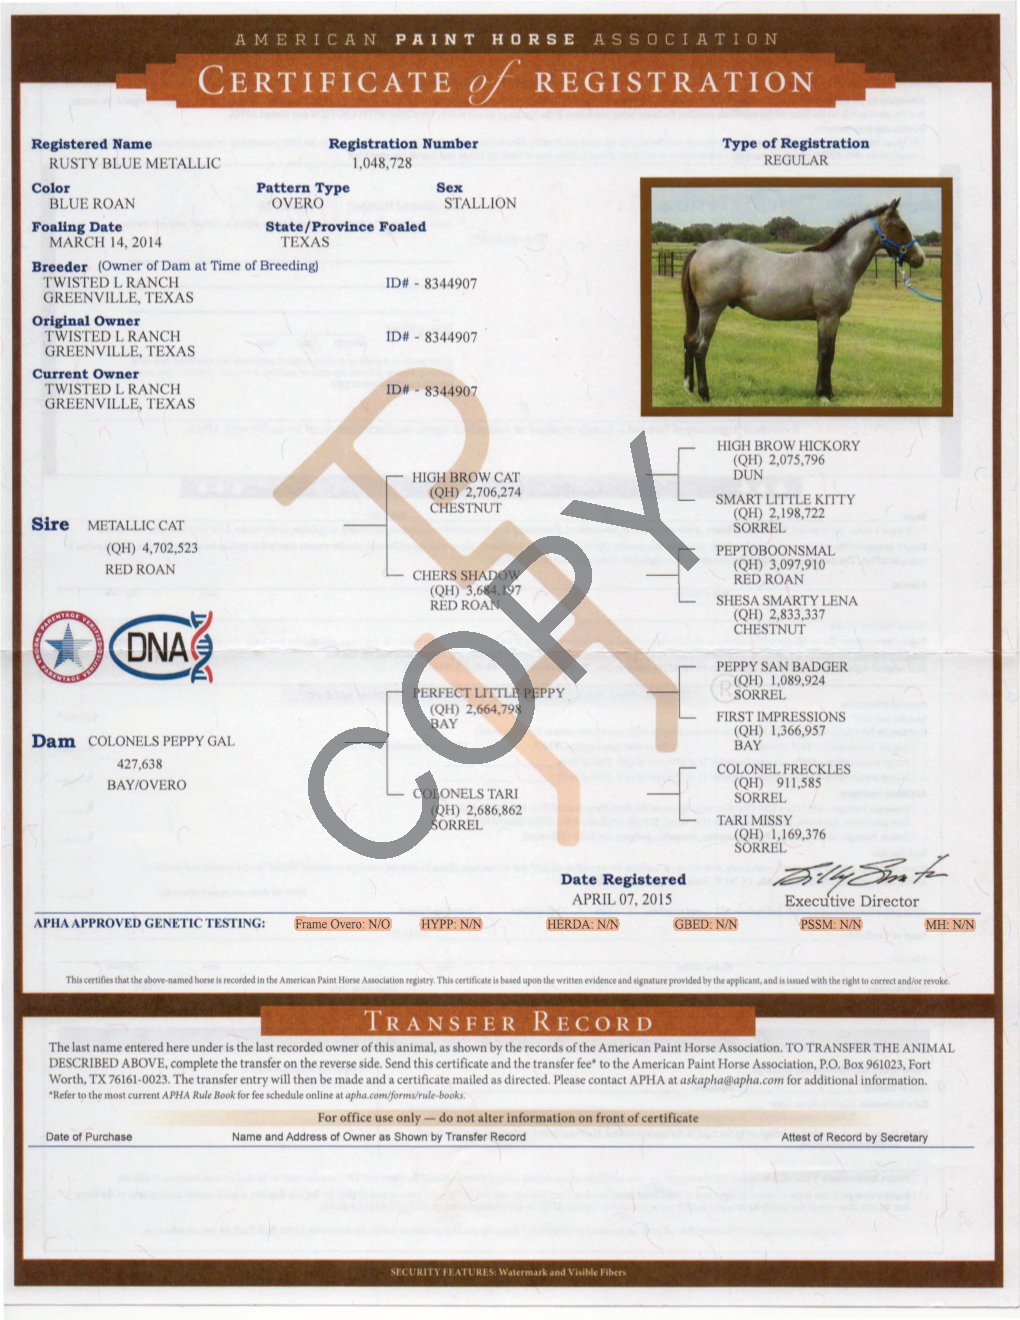 View APHA Papers & DNA Results